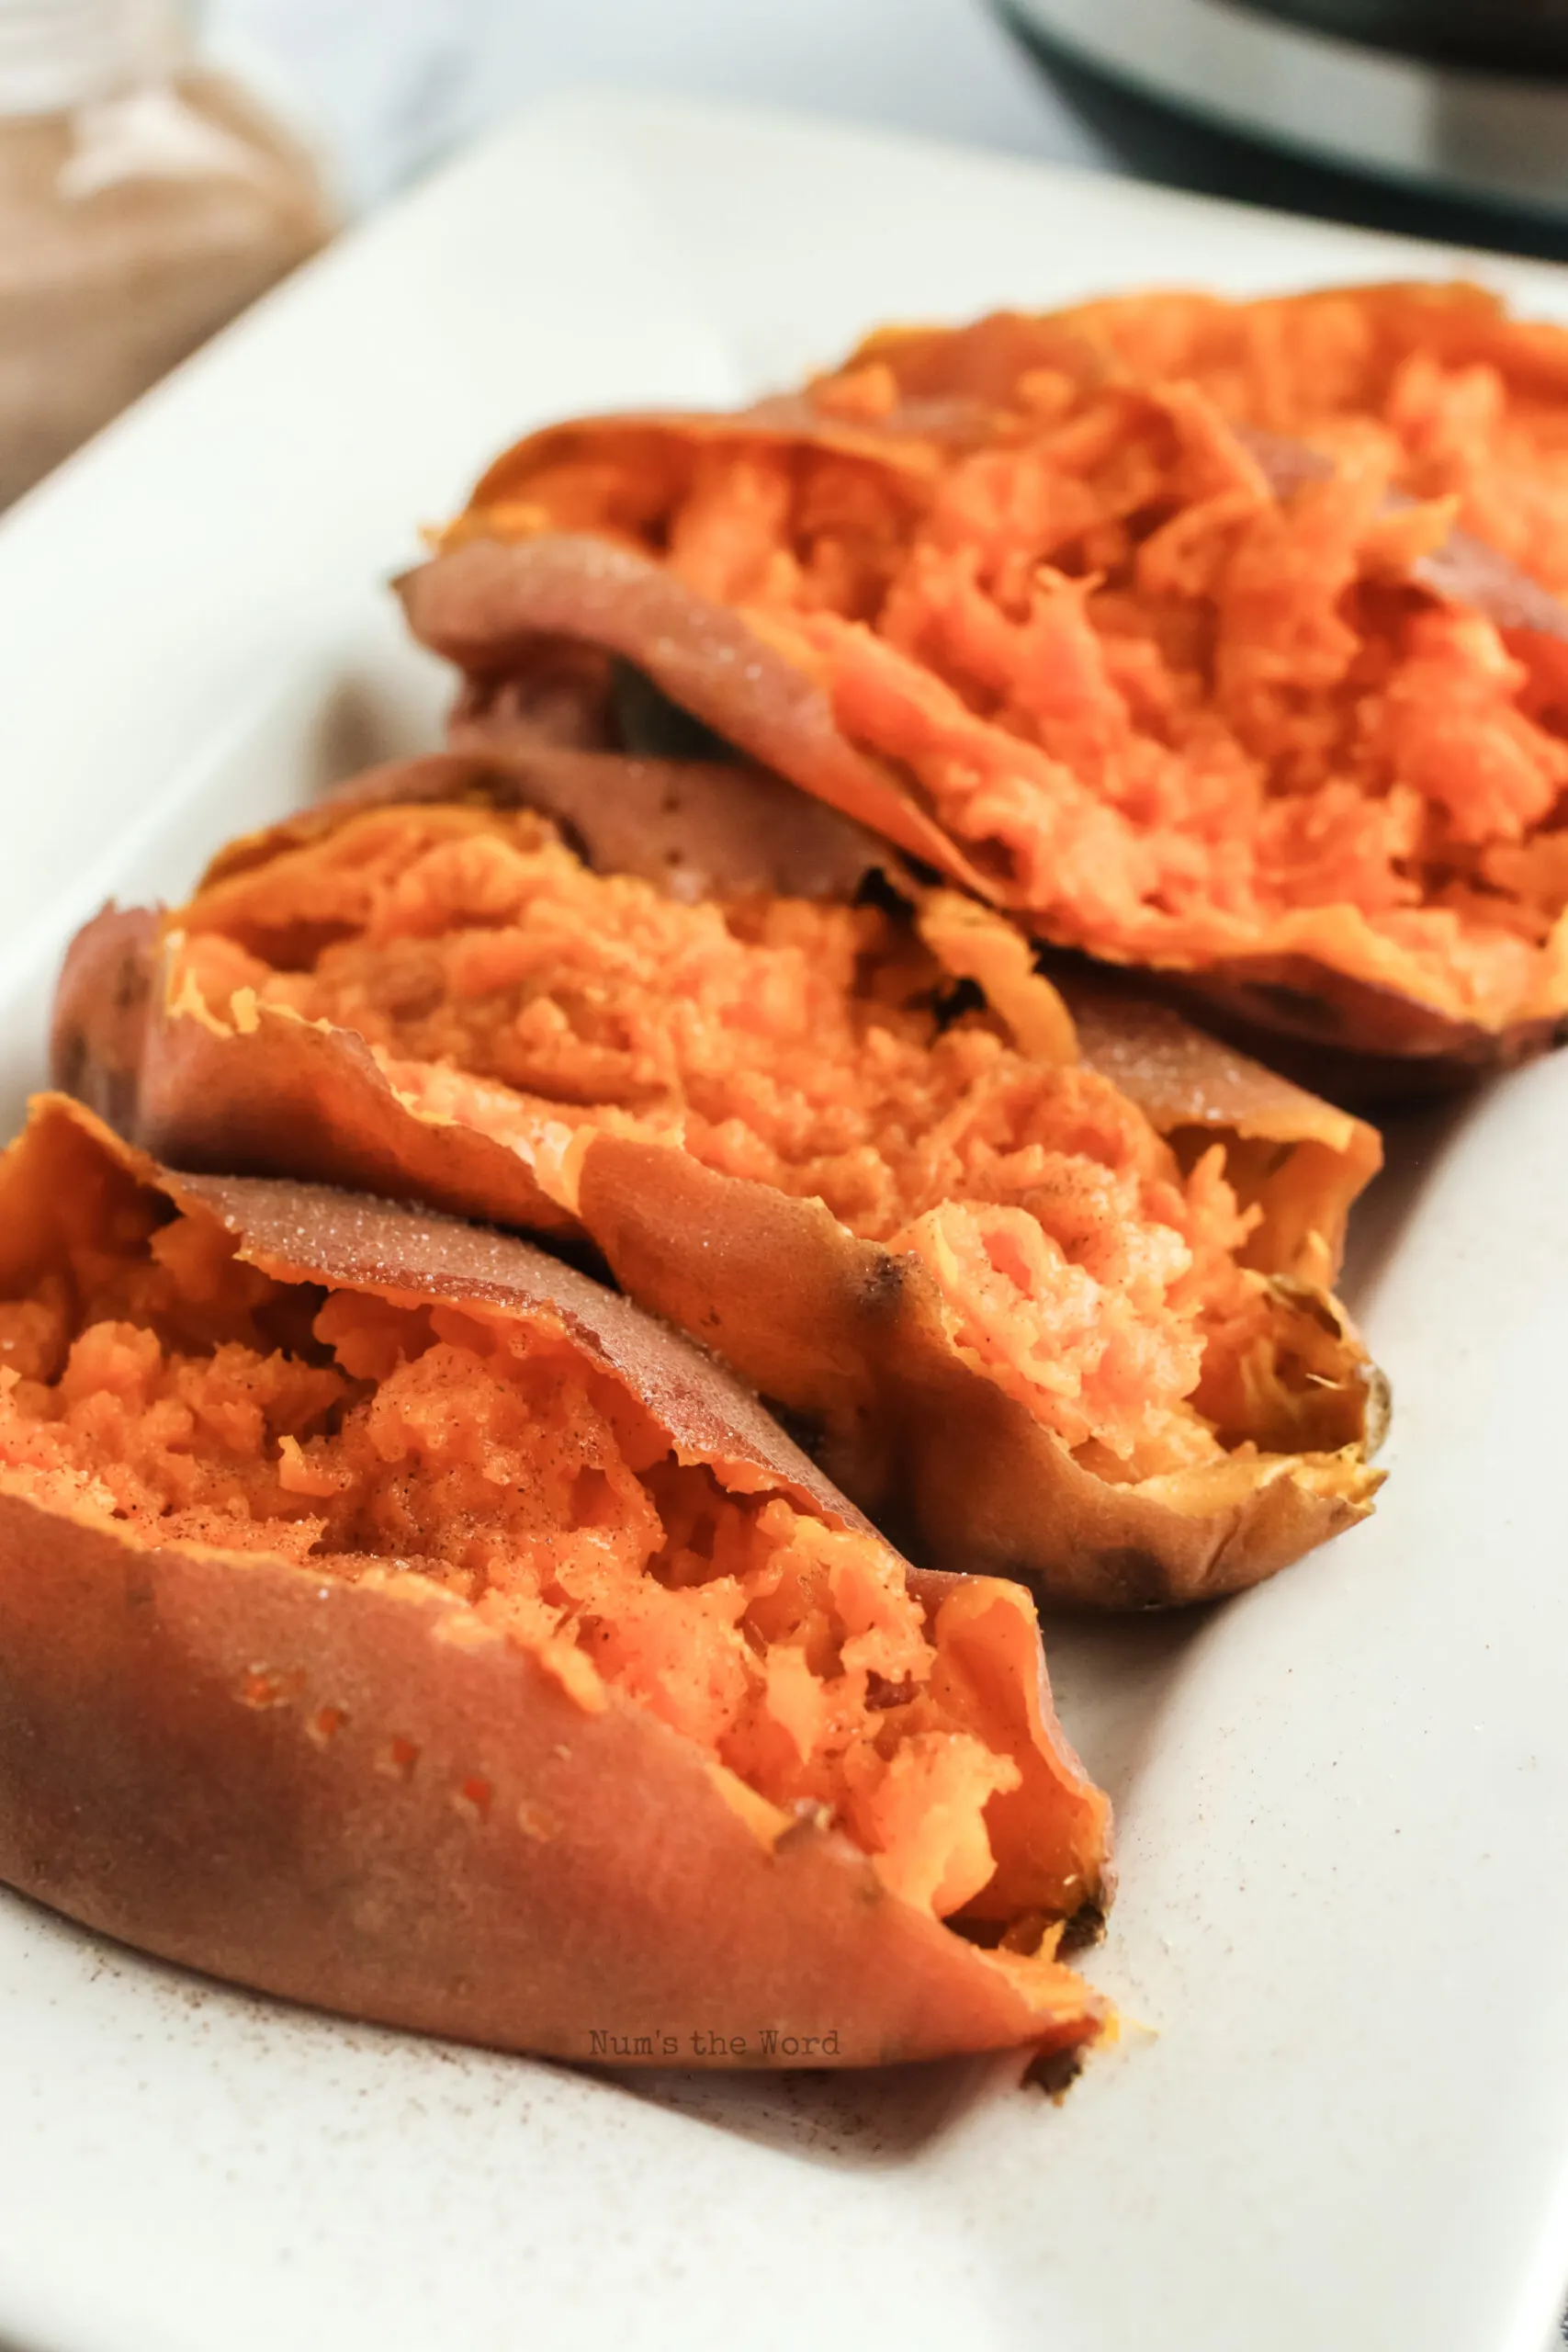 side view of 4 sweet potatoes on a platter, sliced open and ready to serve.